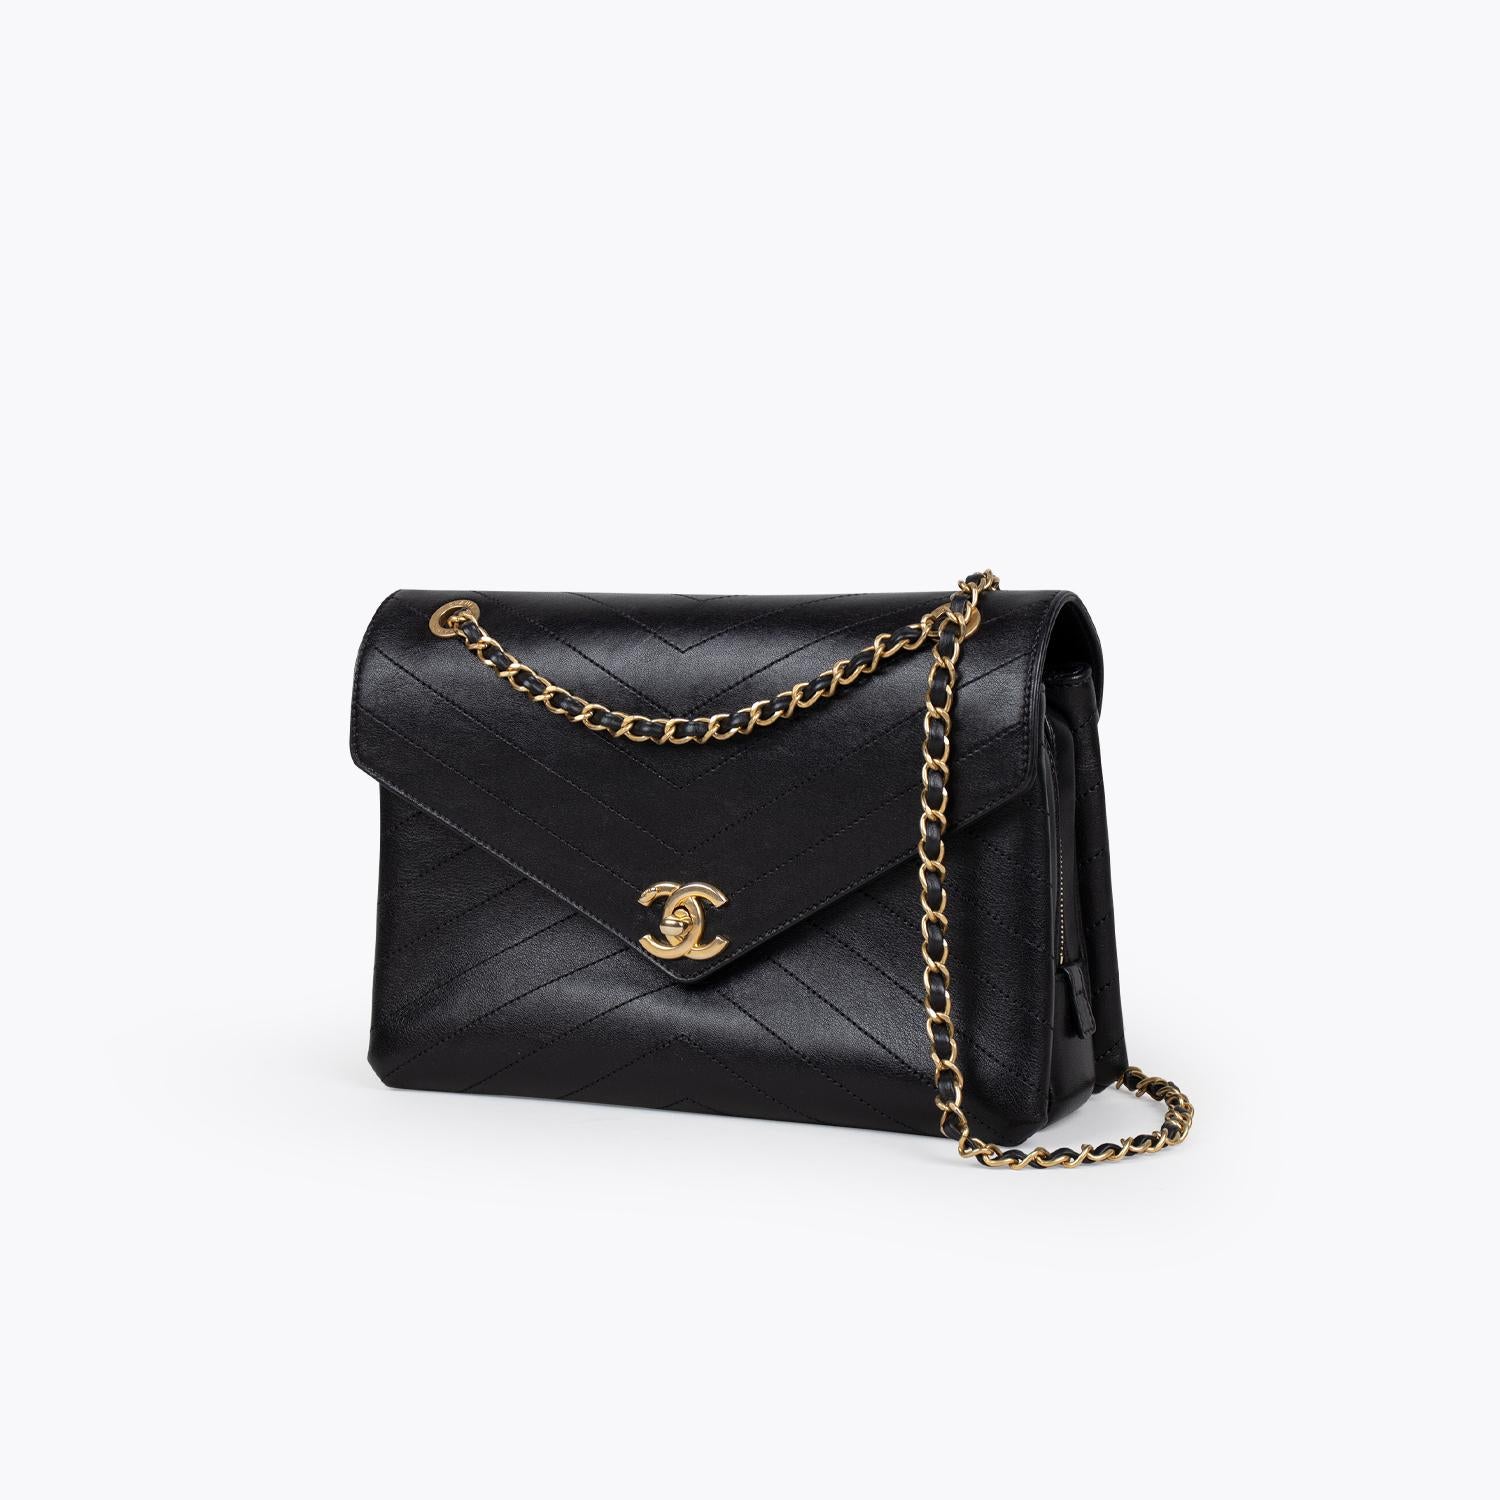 Black Chanel Chevron-quilted Crossbody Bag with

– Gold-antique hardware
– Convertible shoulder strap, with chain-link accents
– Three interior pockets at interior
– One with zip closure at top and CC turn-lock closure at front flap

Overall